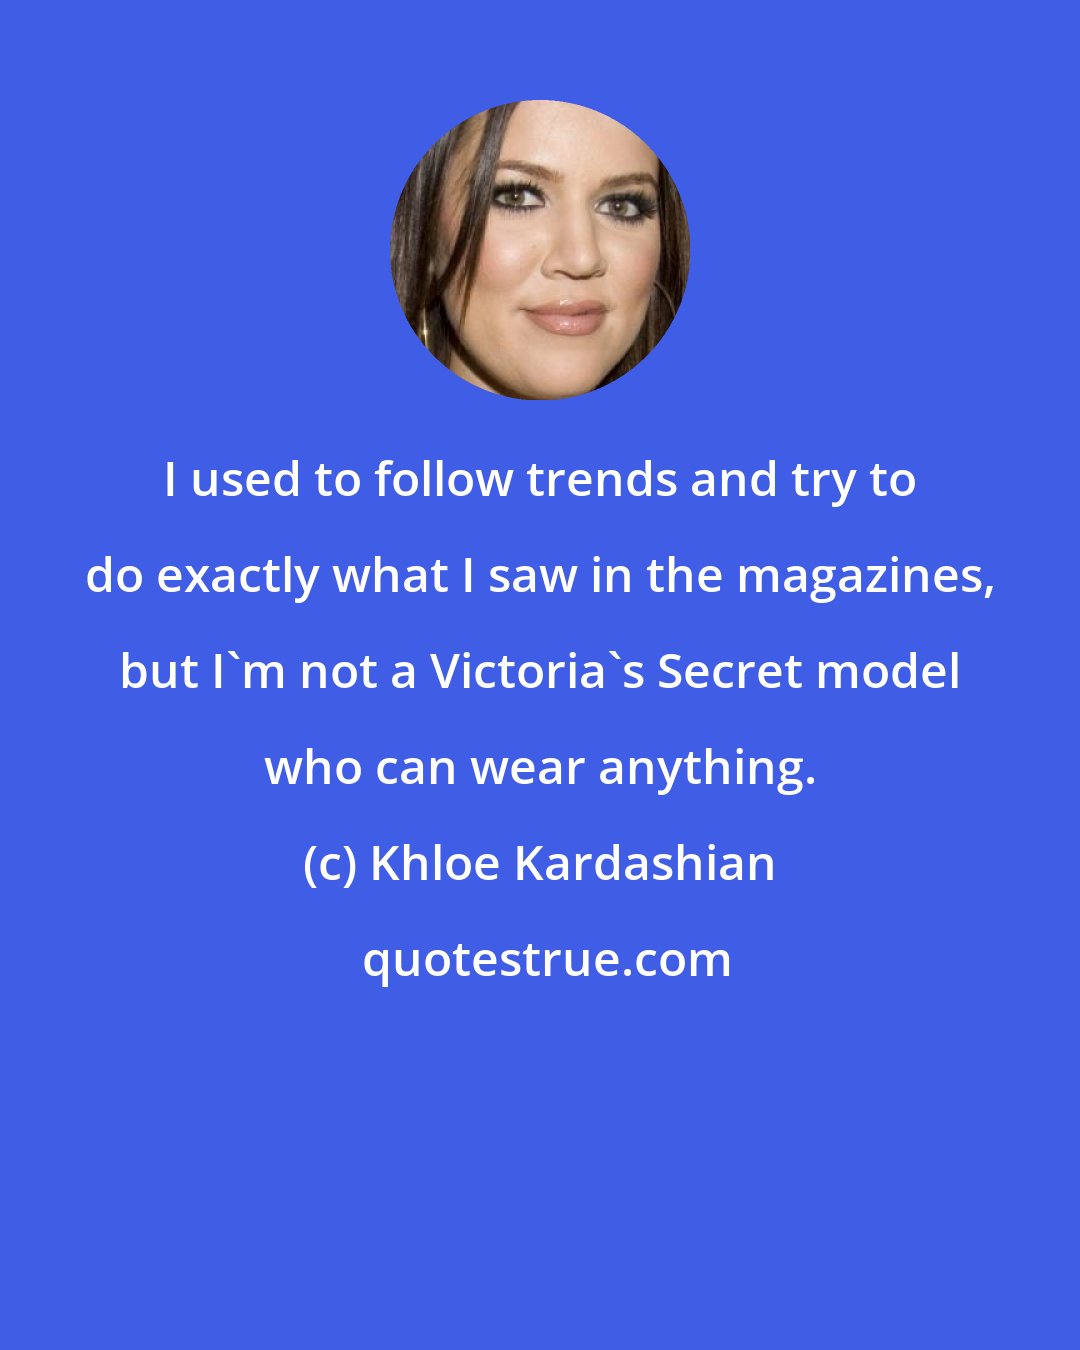 Khloe Kardashian: I used to follow trends and try to do exactly what I saw in the magazines, but I'm not a Victoria's Secret model who can wear anything.